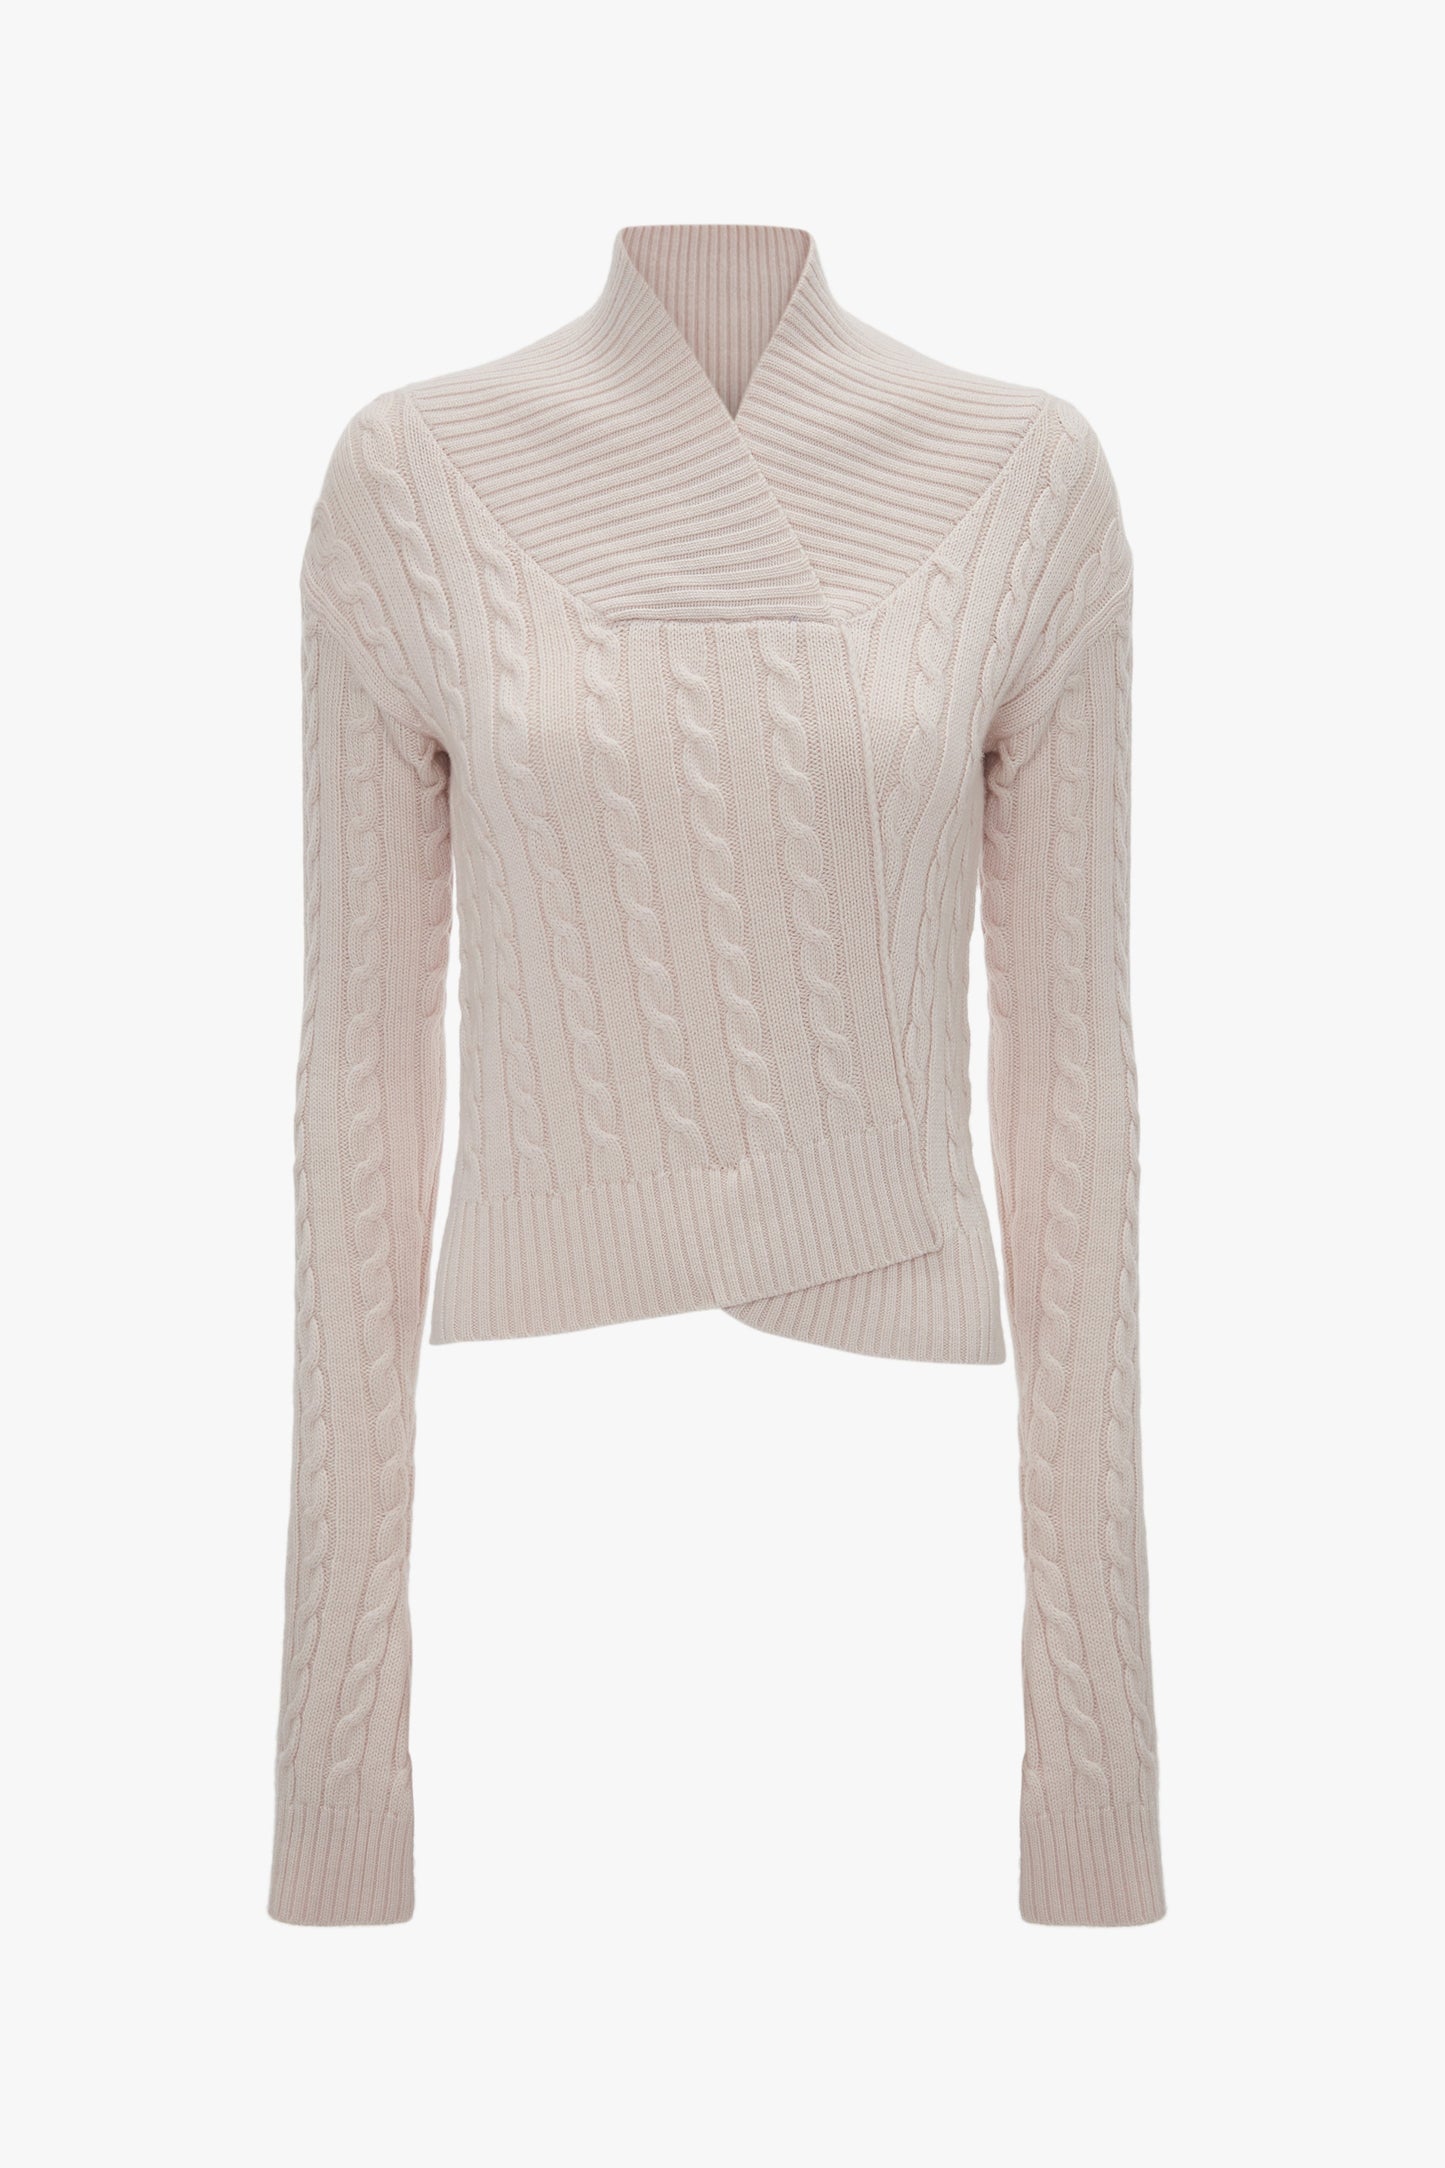 A Wrap Detail Jumper In Bone by Victoria Beckham, crafted from cabled merino wool, featuring a high neckline and an asymmetrical design crossing at the waist for a fitted wrap-style silhouette.